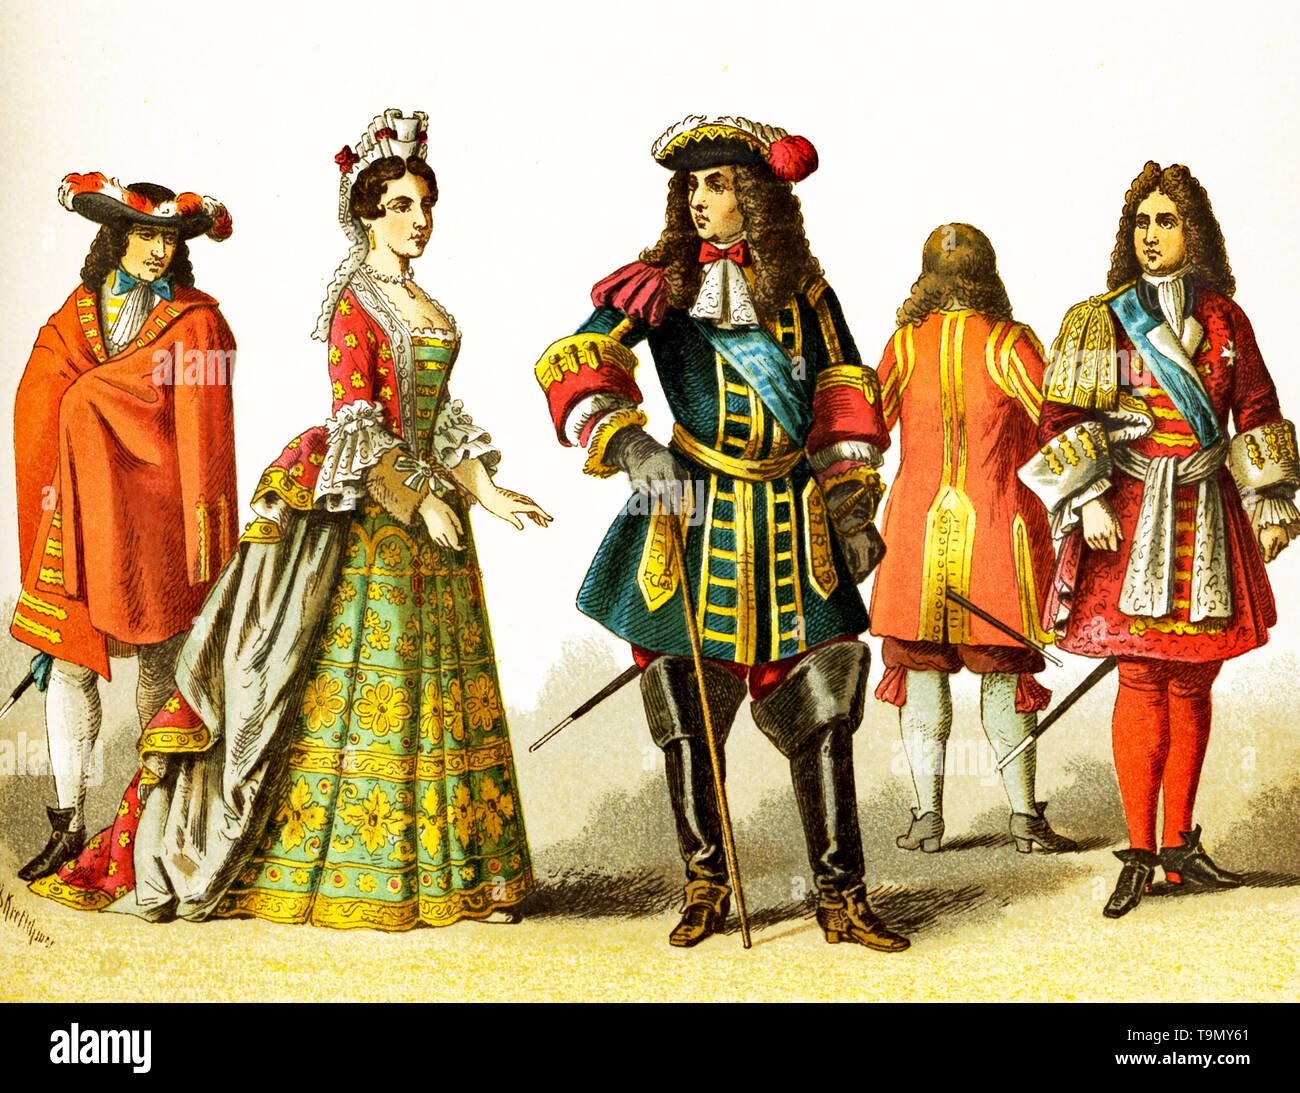 The figures represented here are French people around 1600. They are, from left to right: courtier, lady of rank, Louis XIV in 1680, courtier, courtier. The illustration dates to 1882. Stock Photo